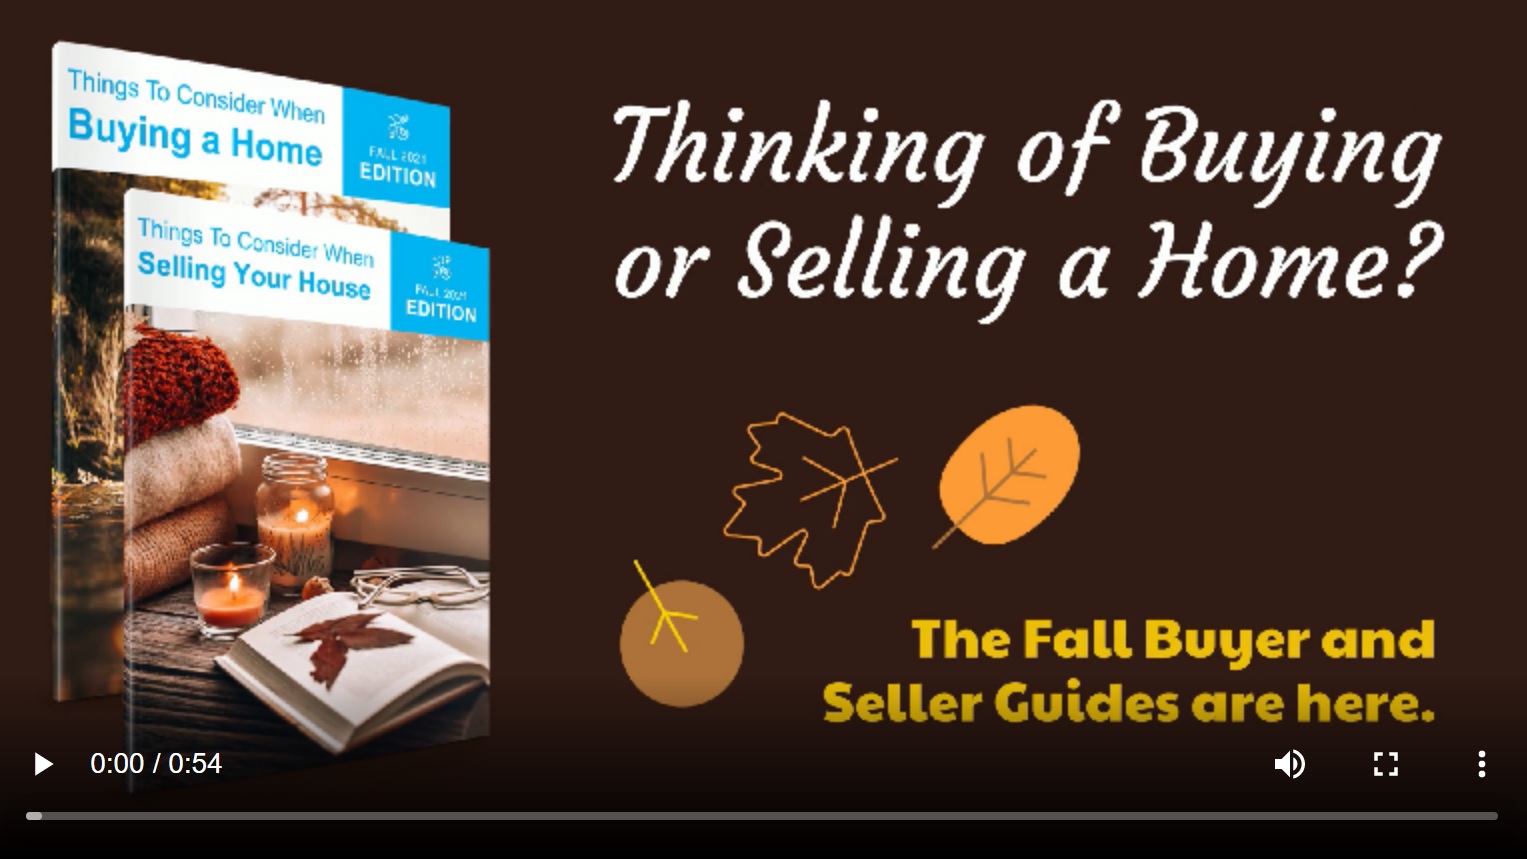 Home Buyer & Seller Guides: Fall 2021